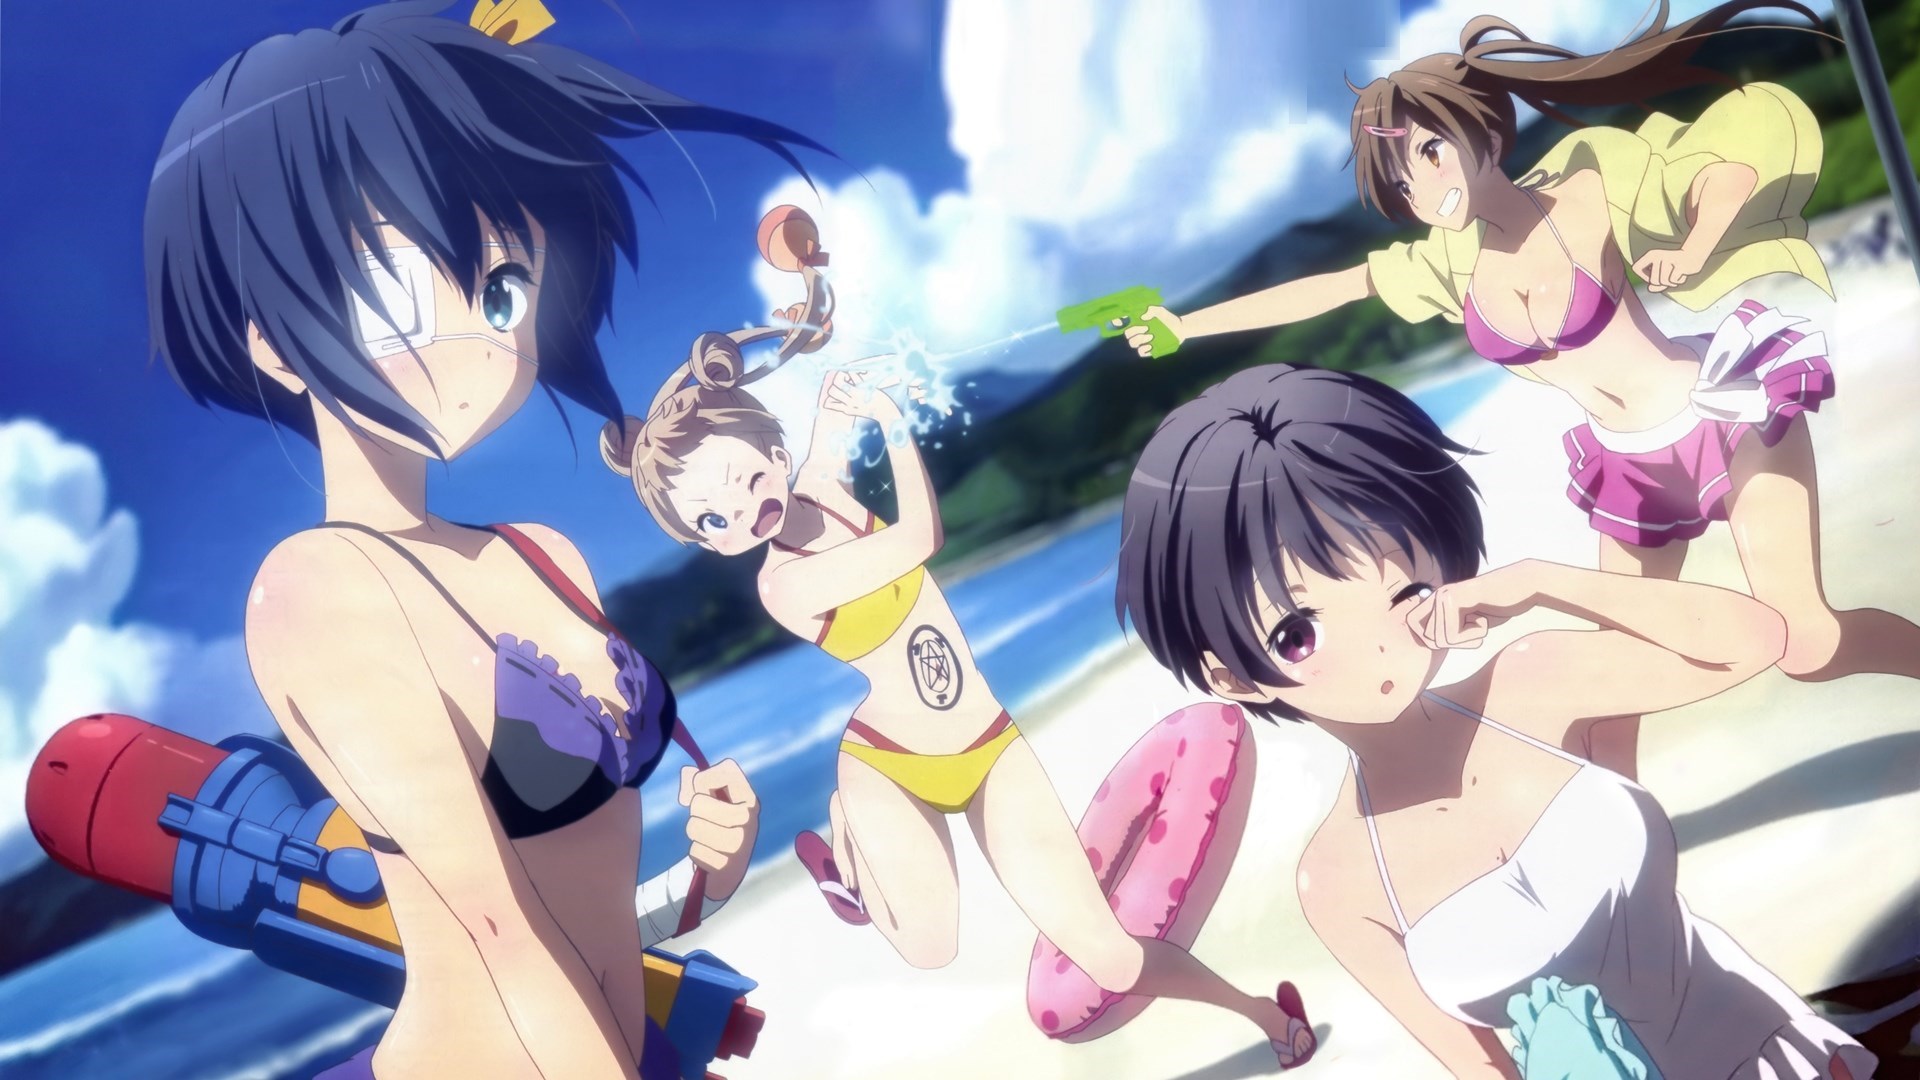 Love, Chunibyo & other Delusions